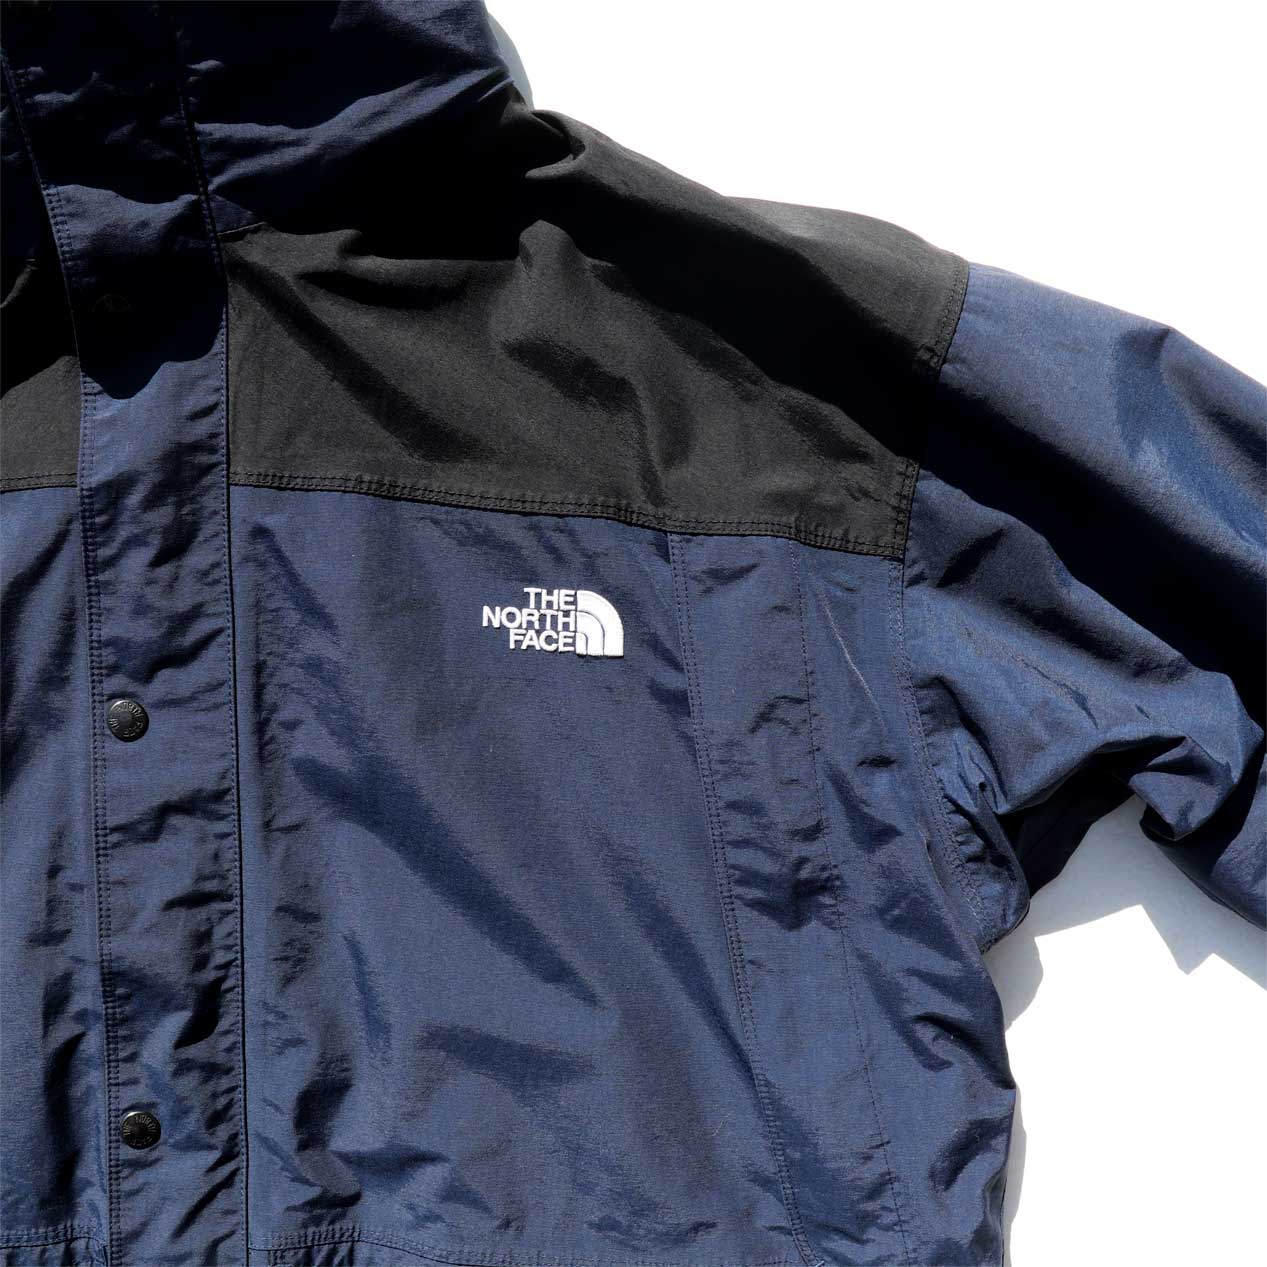 POST JUNK / 90's THE NORTH FACE HYVENT Mountain Jacket [XXL]